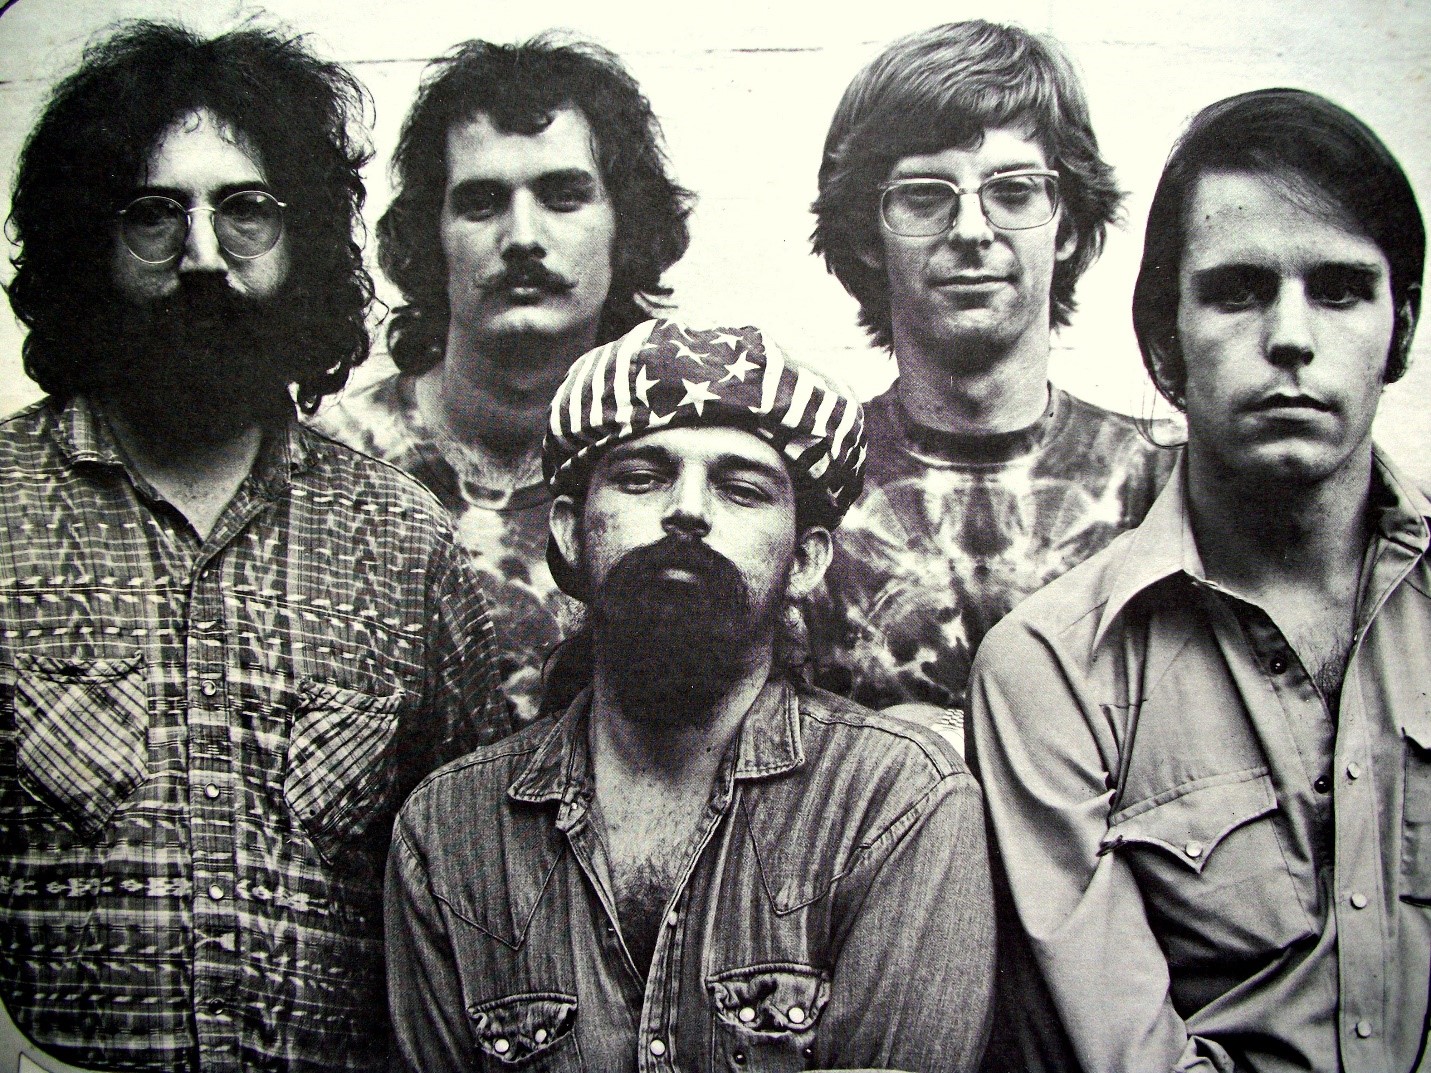 <p>The Grateful Dead, also organizers of the festival, were scheduled to take the stage at Altamont but backed out after all the violence erupted. <span>As they watched the situation deteriorate, the Grateful Dead made the decision to leave Altamont and forgo playing their set. In a famous recap of the incident, </span><a href="https://www.rollingstone.com/music/music-news/the-rolling-stones-disaster-at-altamont-let-it-bleed-71299/">a <em>Rolling Stone</em> magazine staff member wrote</a><span>, "That's the way things went at Altamont—so badly that the Grateful Dead, prime organizers, and movers of the festival, didn't even get to play."</span></p>